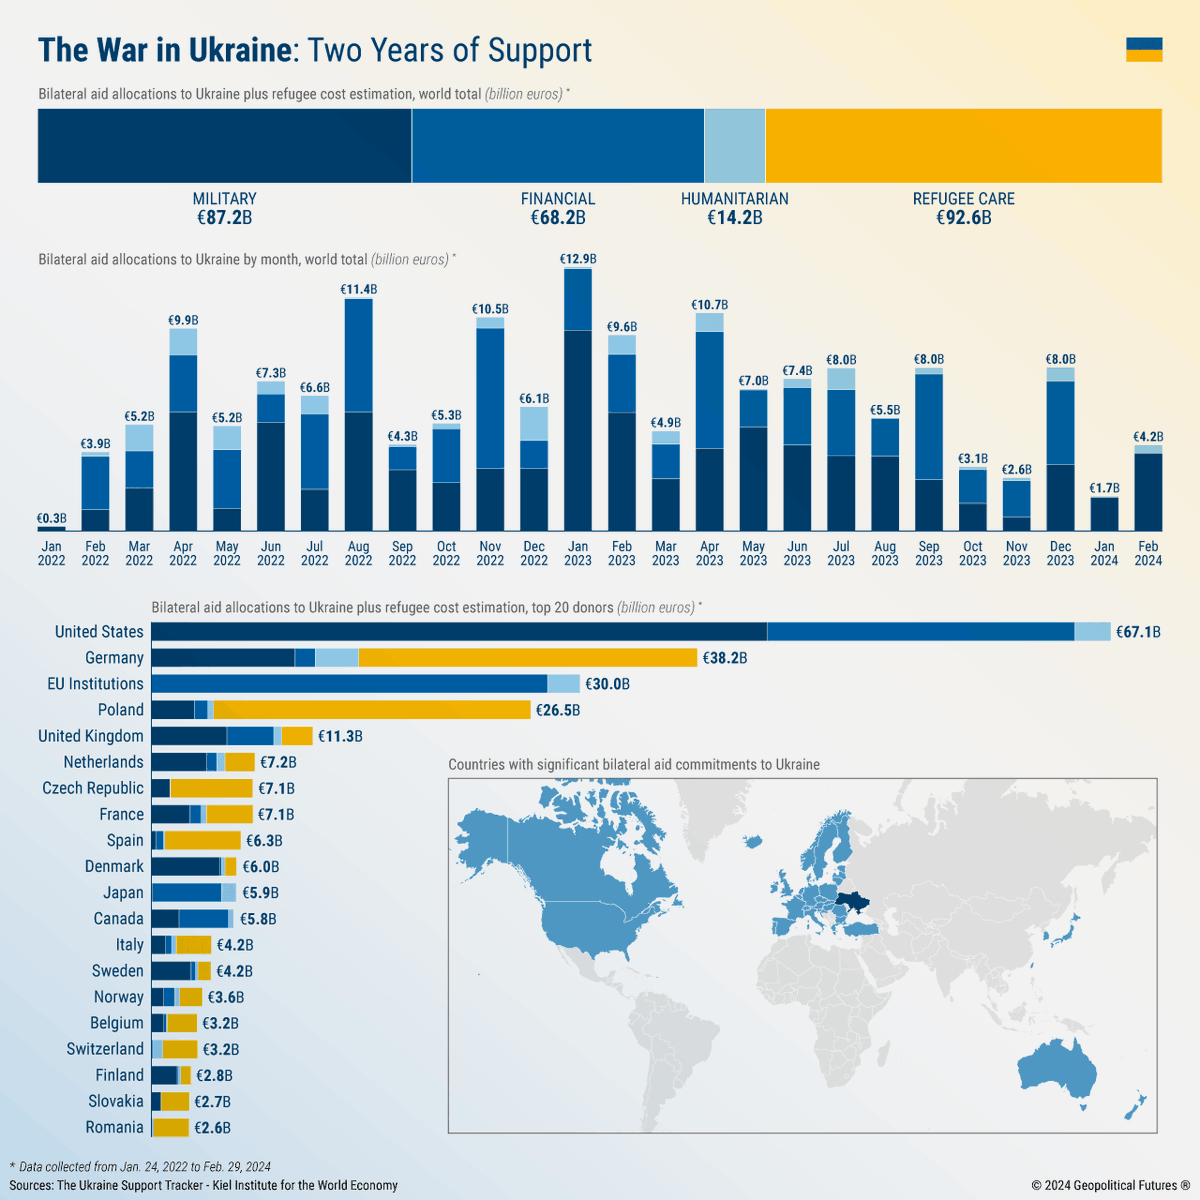 The cost of aiding Ukraine is racking up, and the politics of using public money to do so are increasingly fraught. With war fatigue on the rise, how long can the West continue to provide #Ukraine this level of support? Details in this week's free graphic on our website.